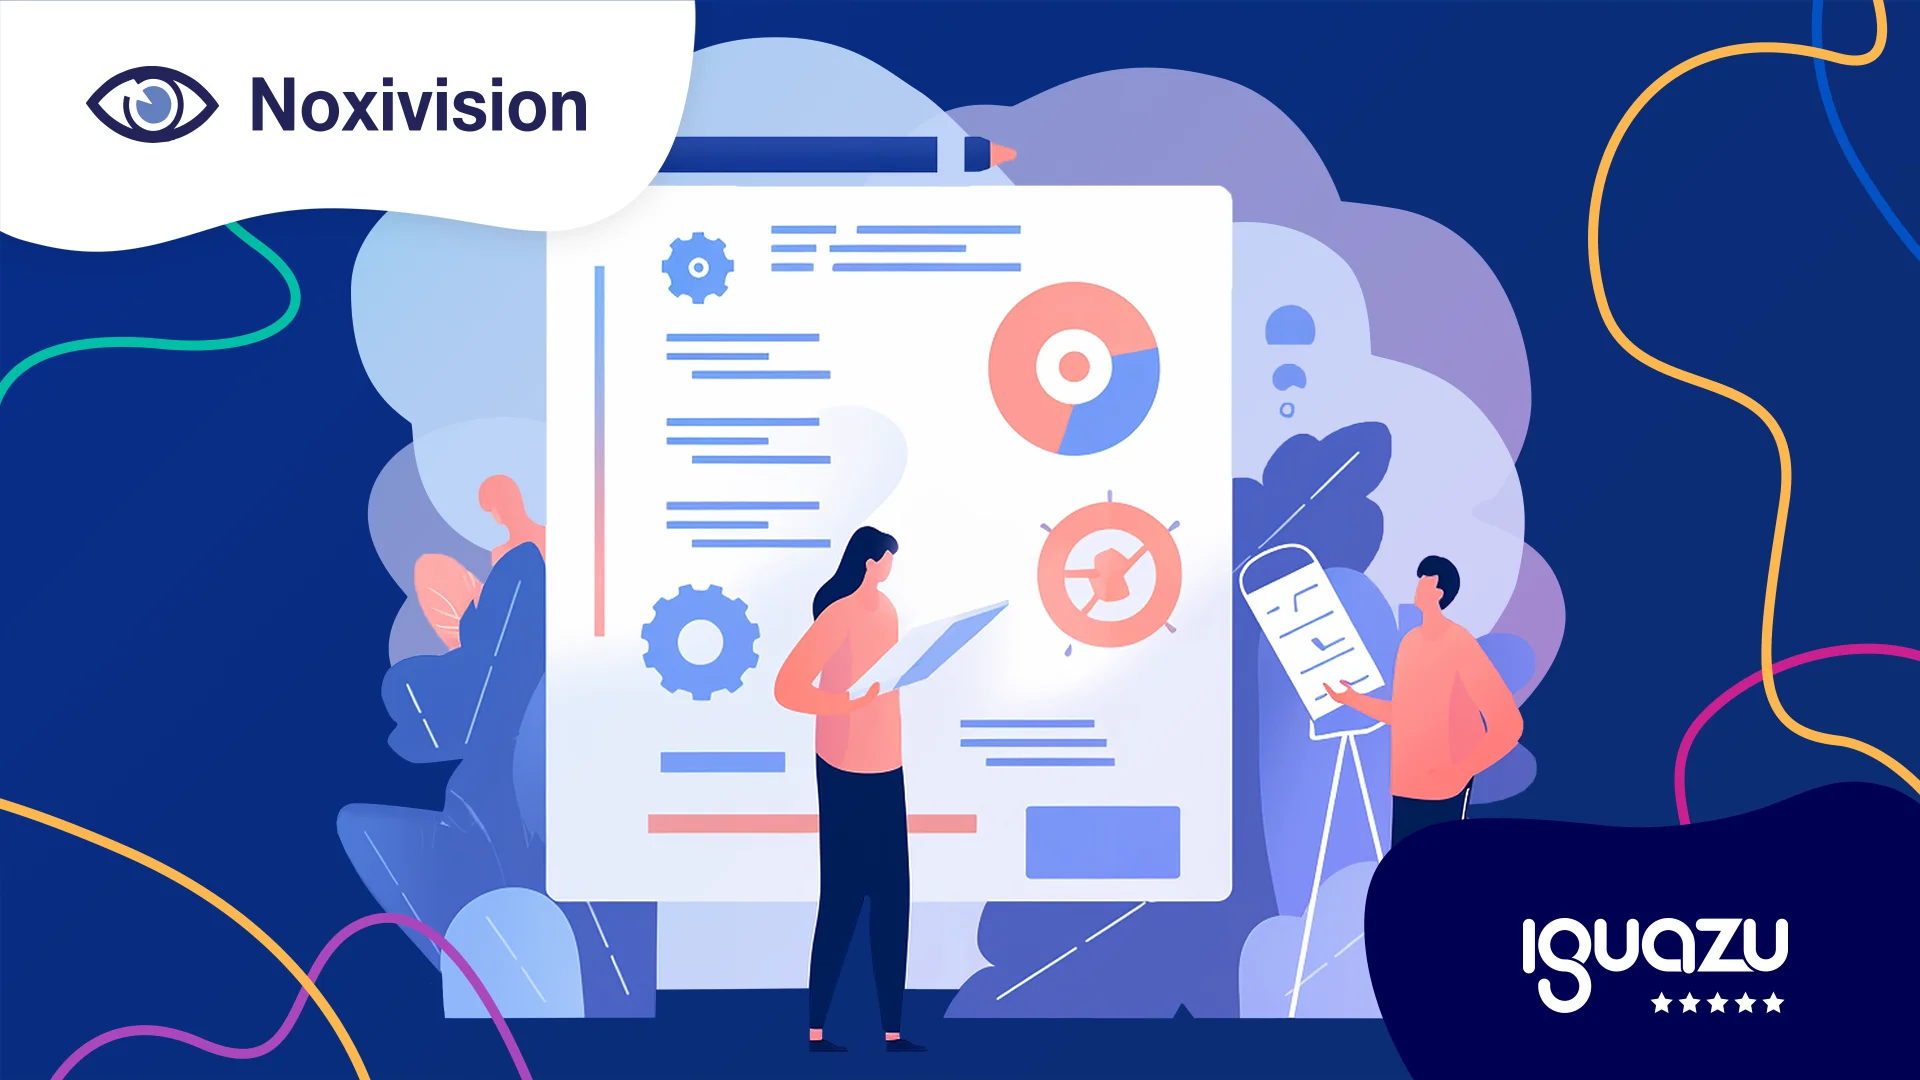 Noxivision — Crafting AI-Asstsed Marketing Briefs with ChatGPT